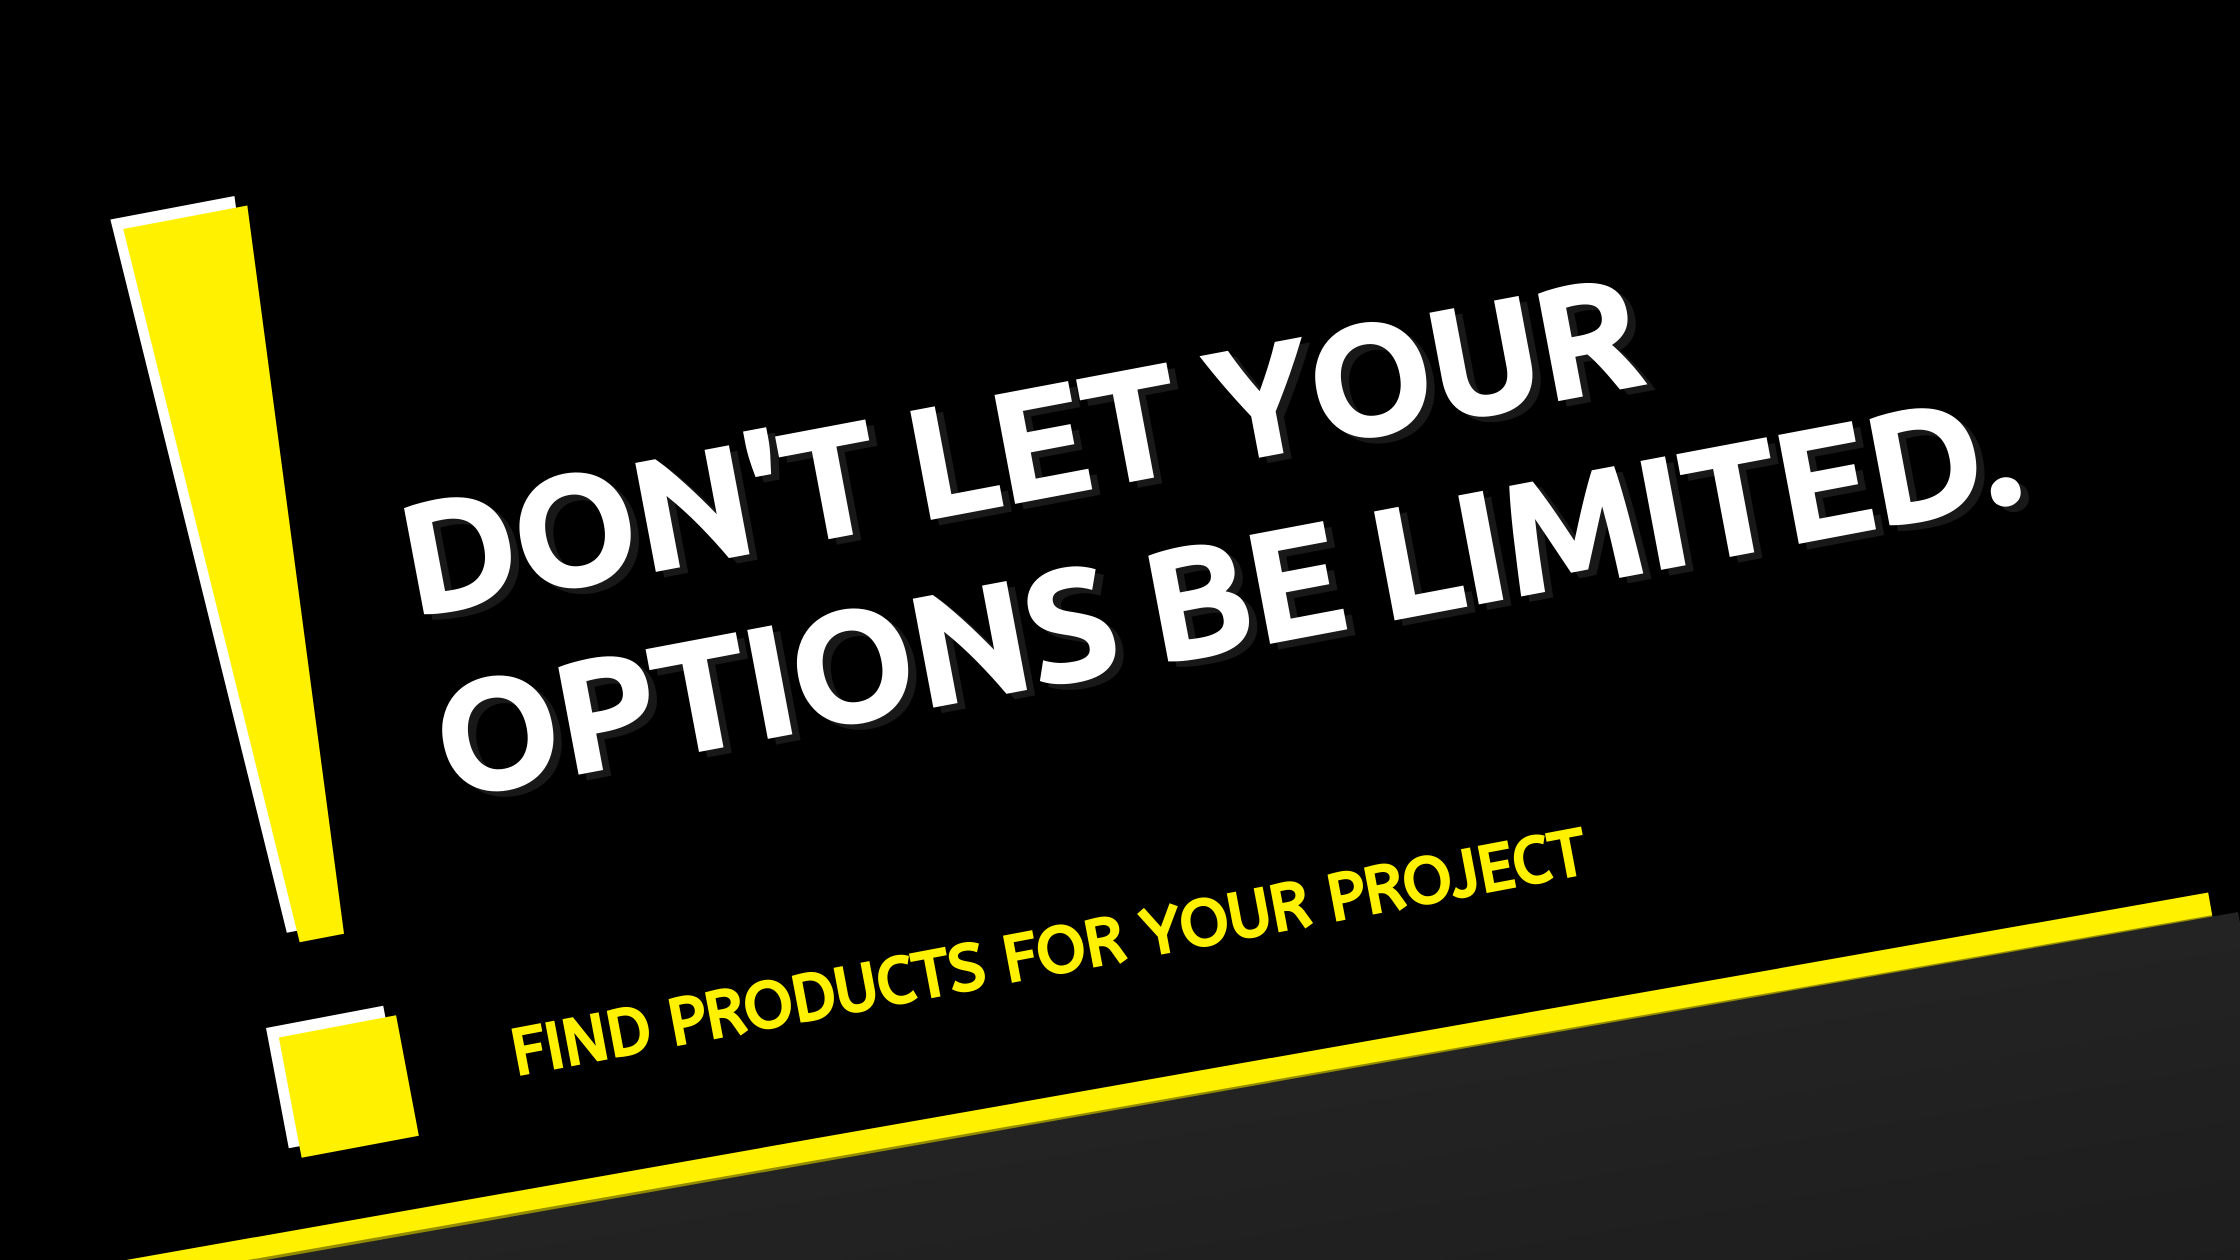 the Blea Store - Don't let your options be limited | Find products for your project